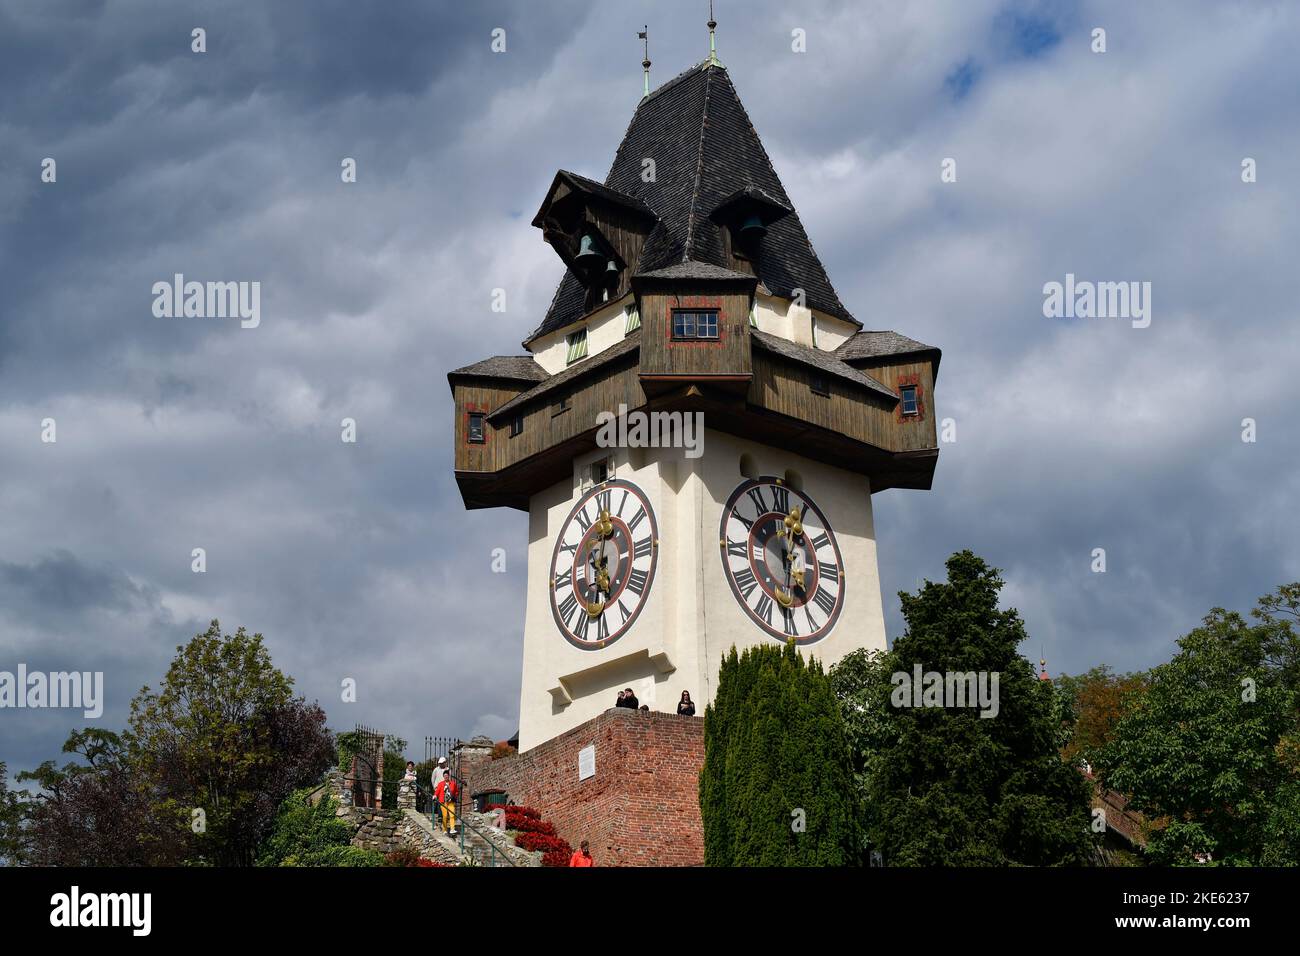 Graz, Austria - September 22, 2022: Unidentified tourists on Schlossberg hill with clock tower the landmark of Graz in UNESCO world heritage site of G Stock Photo